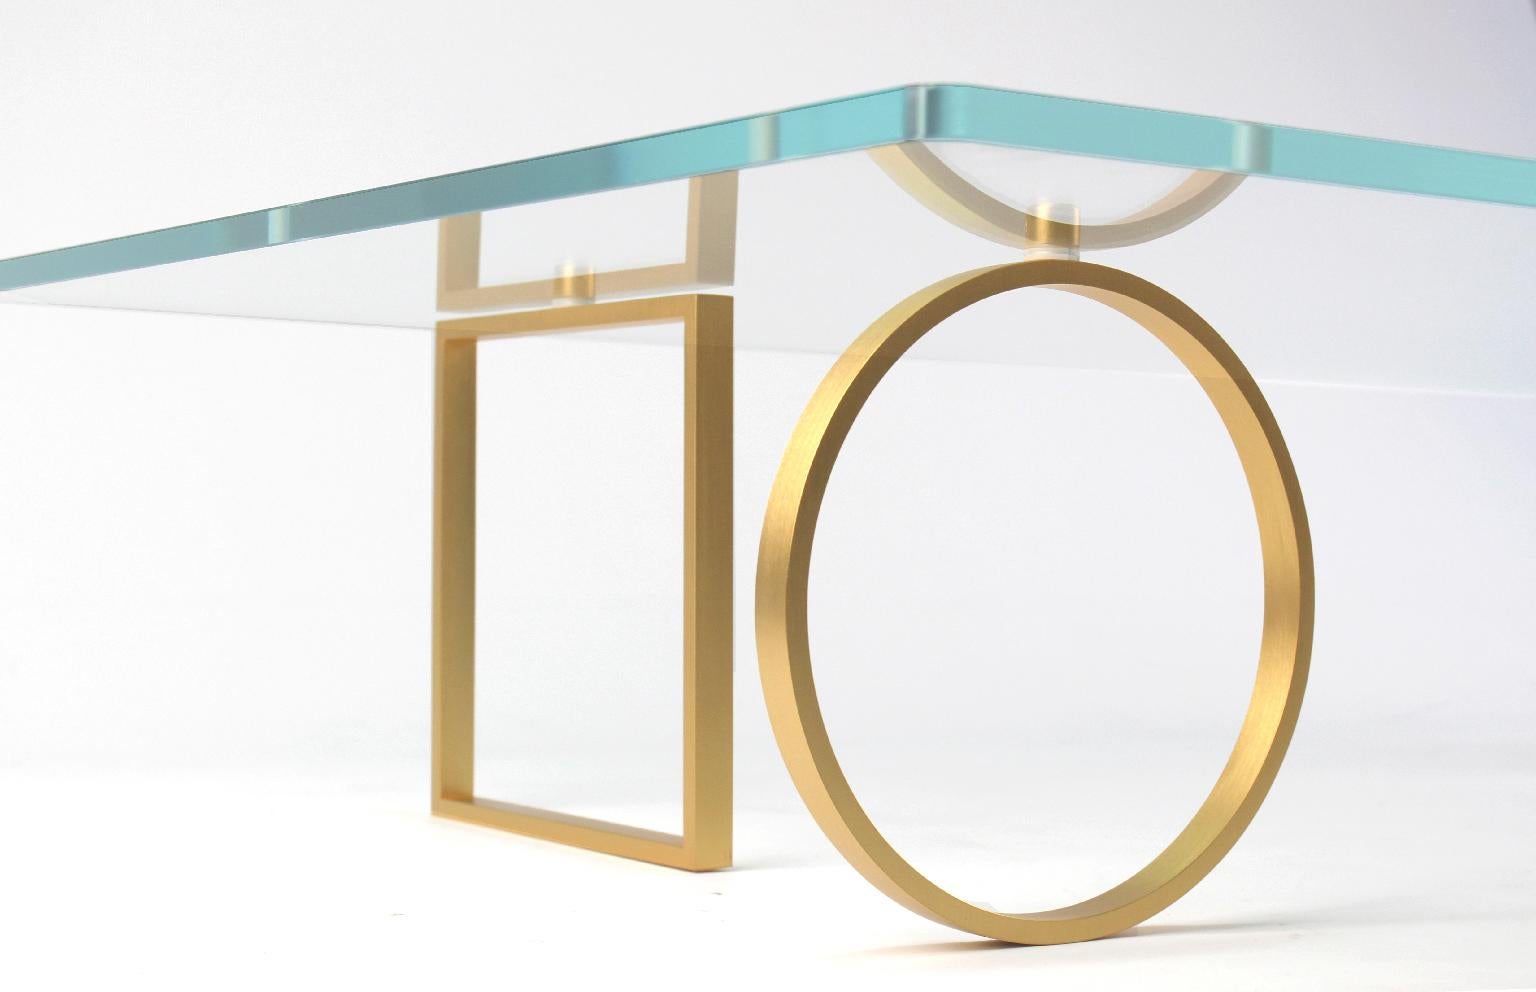 Minimalist 21st Century Bagatto Brass and Glass Contemporary Coffee Table by Ilaria Bianchi For Sale